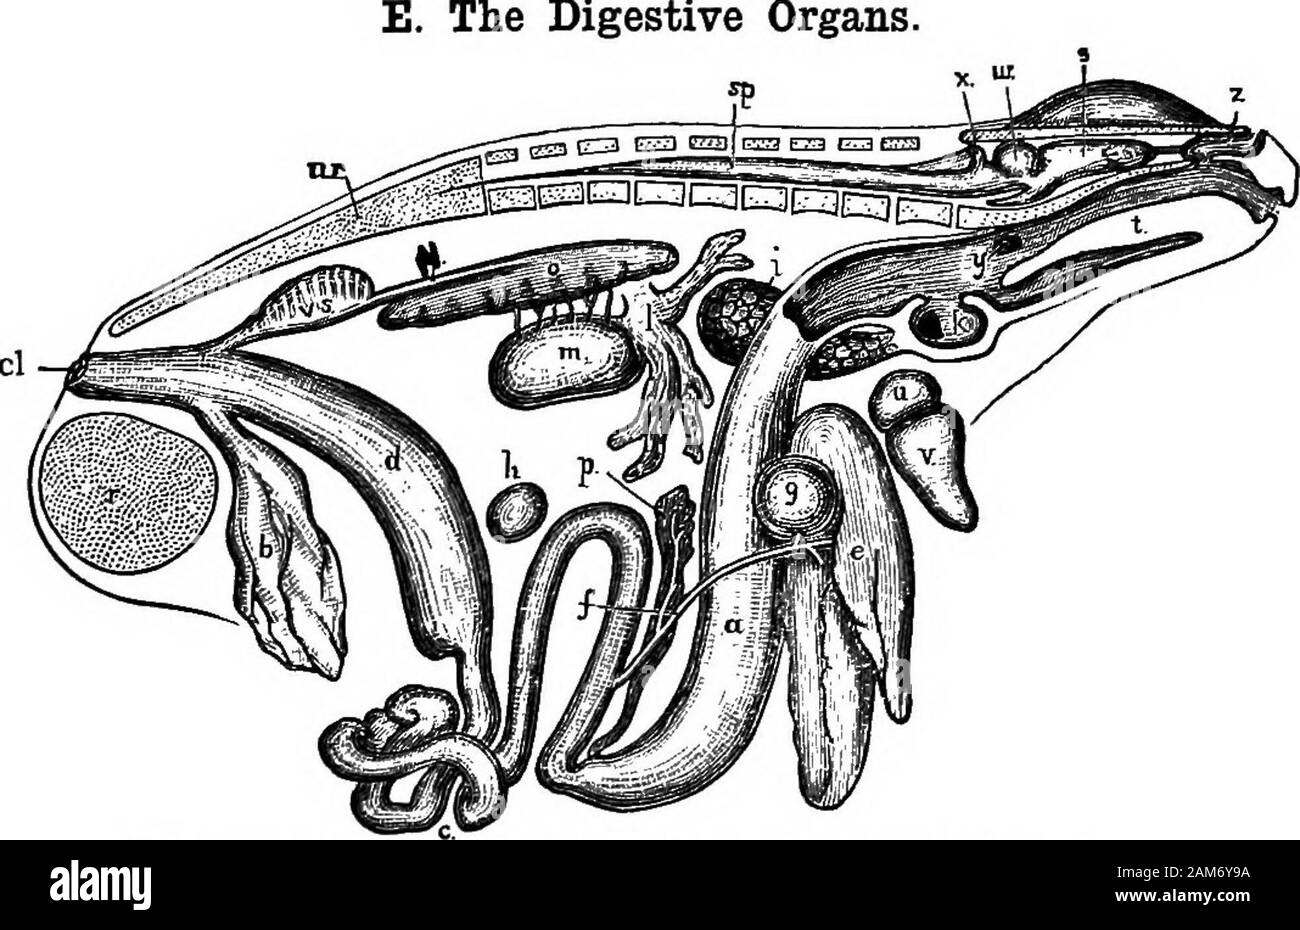 The frog: an introduction to anatomy, histology, and embryology . n ; a, ureter ; v, posterior vena cava. .6. In the female frog note, in addition to the above parts,a. The ovaries : two large bodies of irregular shape, eachconsisting of a mass of spherical black and whiteeggs, like small shot. 20 GENERAL ANATOMY OF THE EEOG b. The oviducts: two long, very much convoluted tubes withthick white walls, lying at the sides of the body cavity.7. In the male frog note, a. The testes: a pair of ovoid bodies of a pale yellowcolour, attached to the dorsal wall of the body cavity. D. The Peritoneum. Not Stock Photo